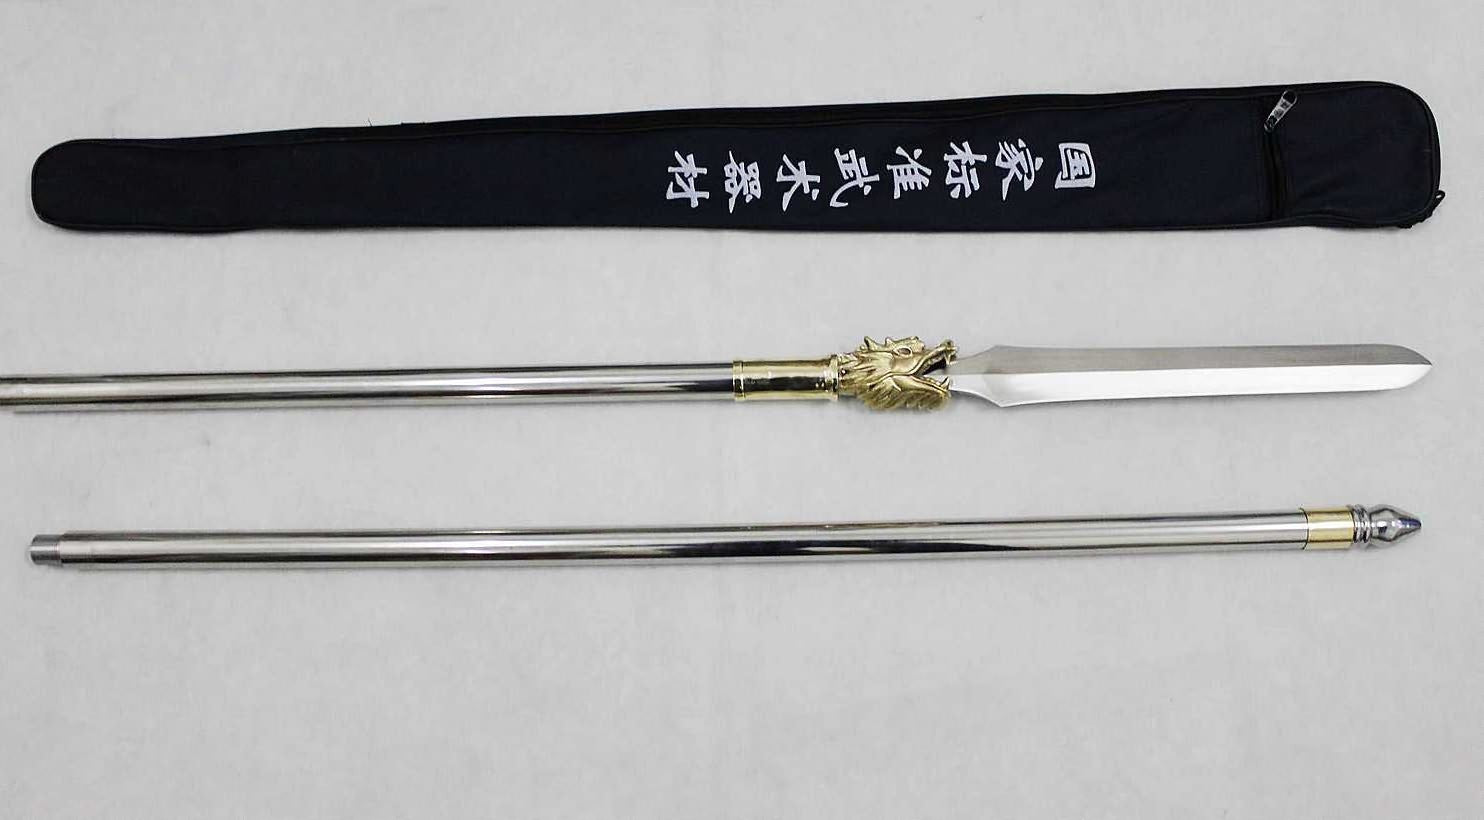 China dragon spear,Liuhe Pike,Stainless steel spearhead,Length 82 inch - Chinese sword shop